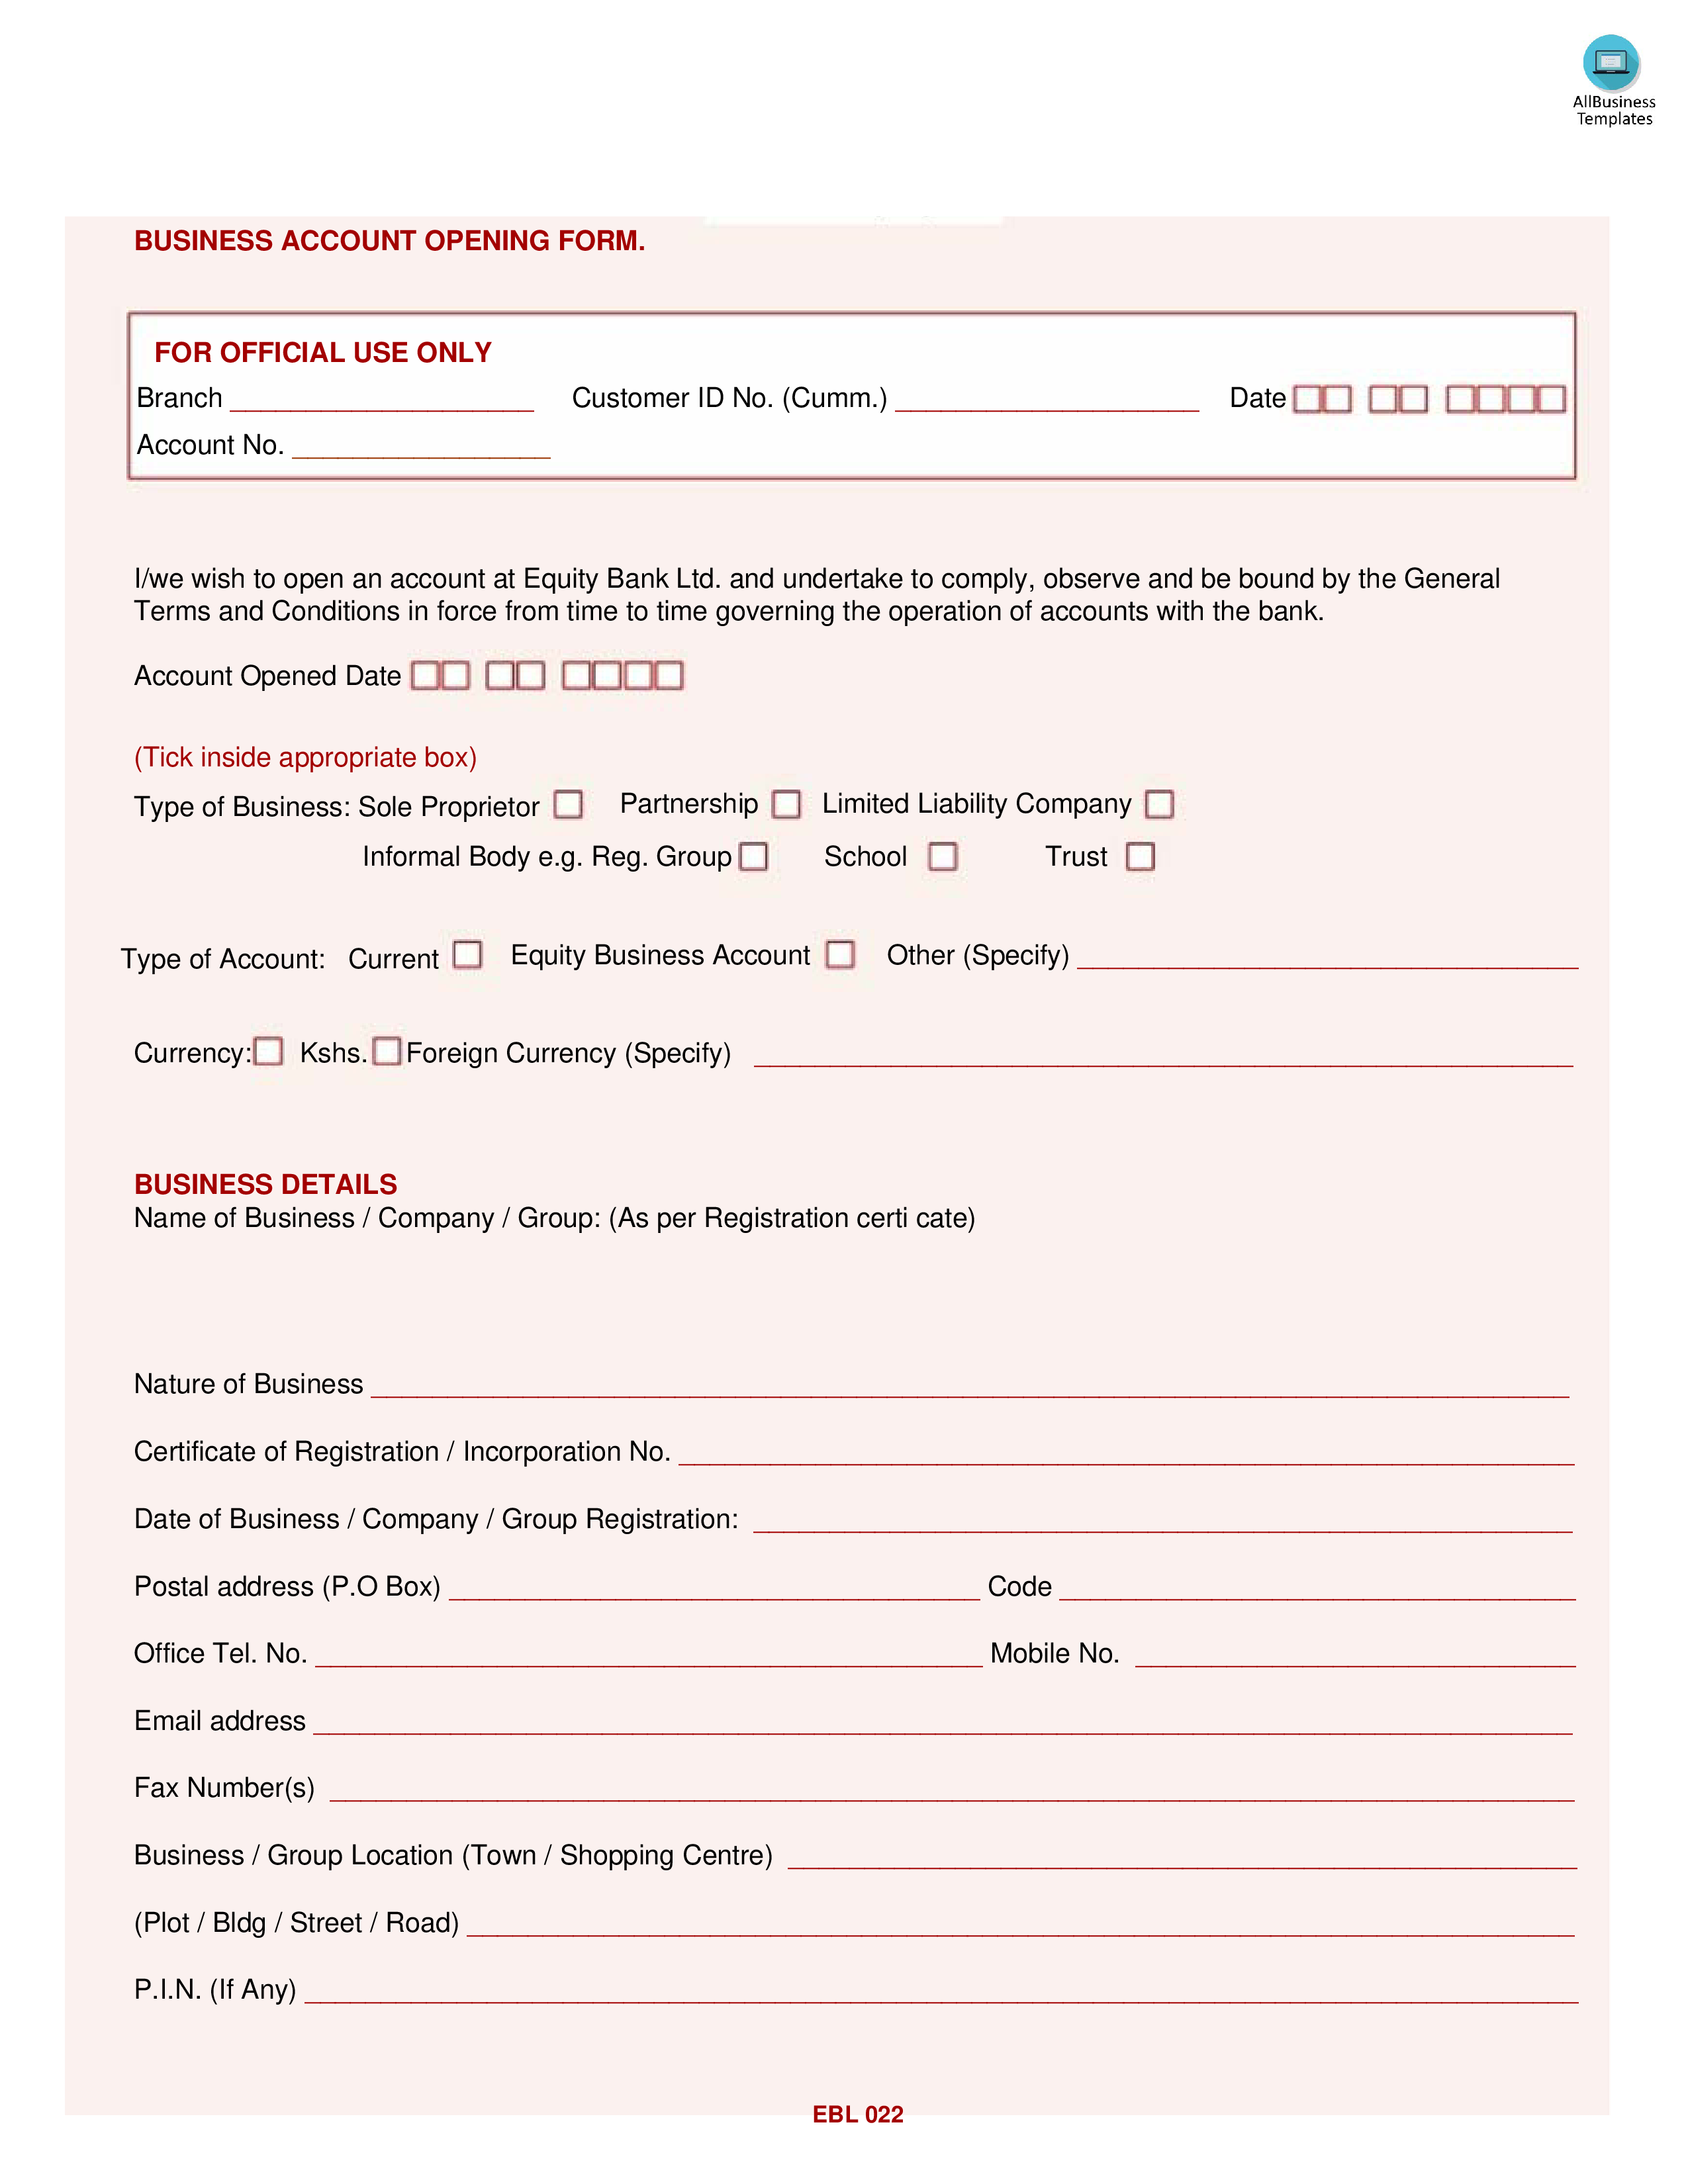 Business Account Form main image